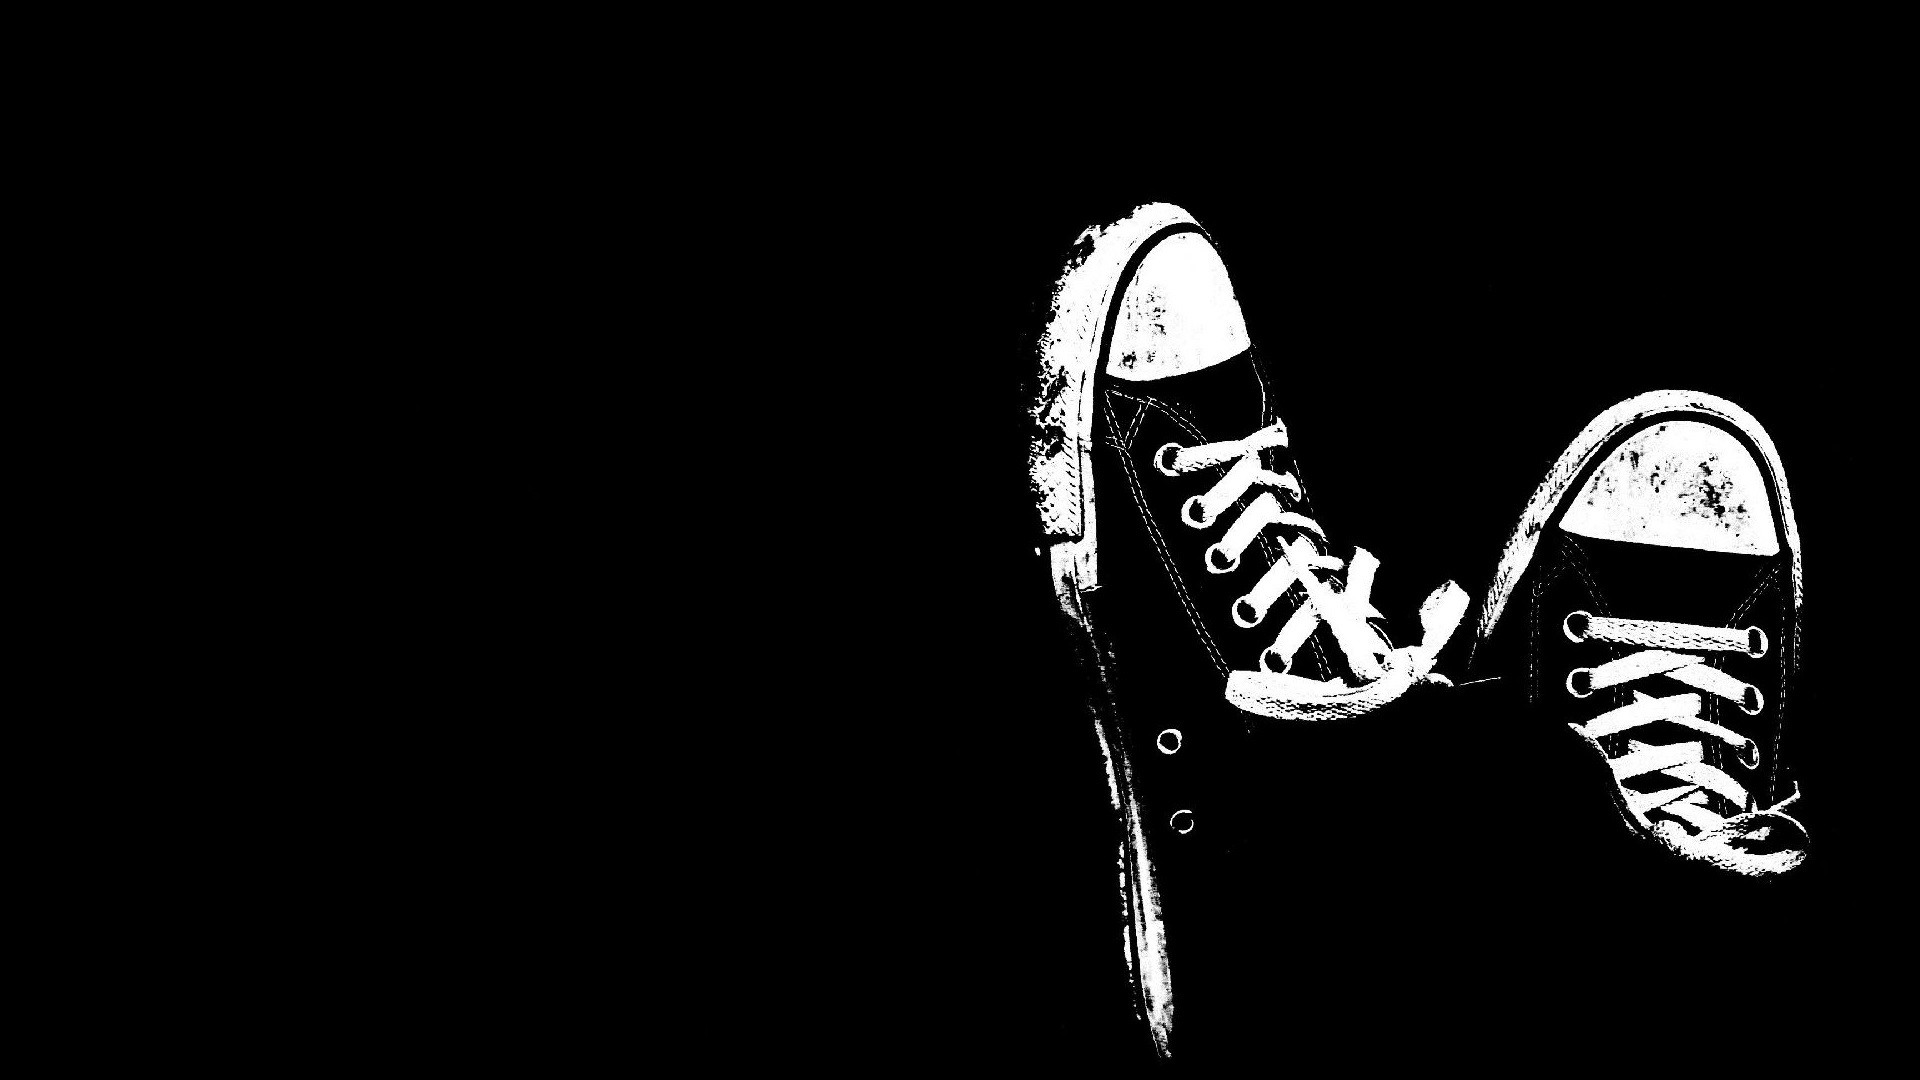 All Star Shoes Monochrome 1920x1080